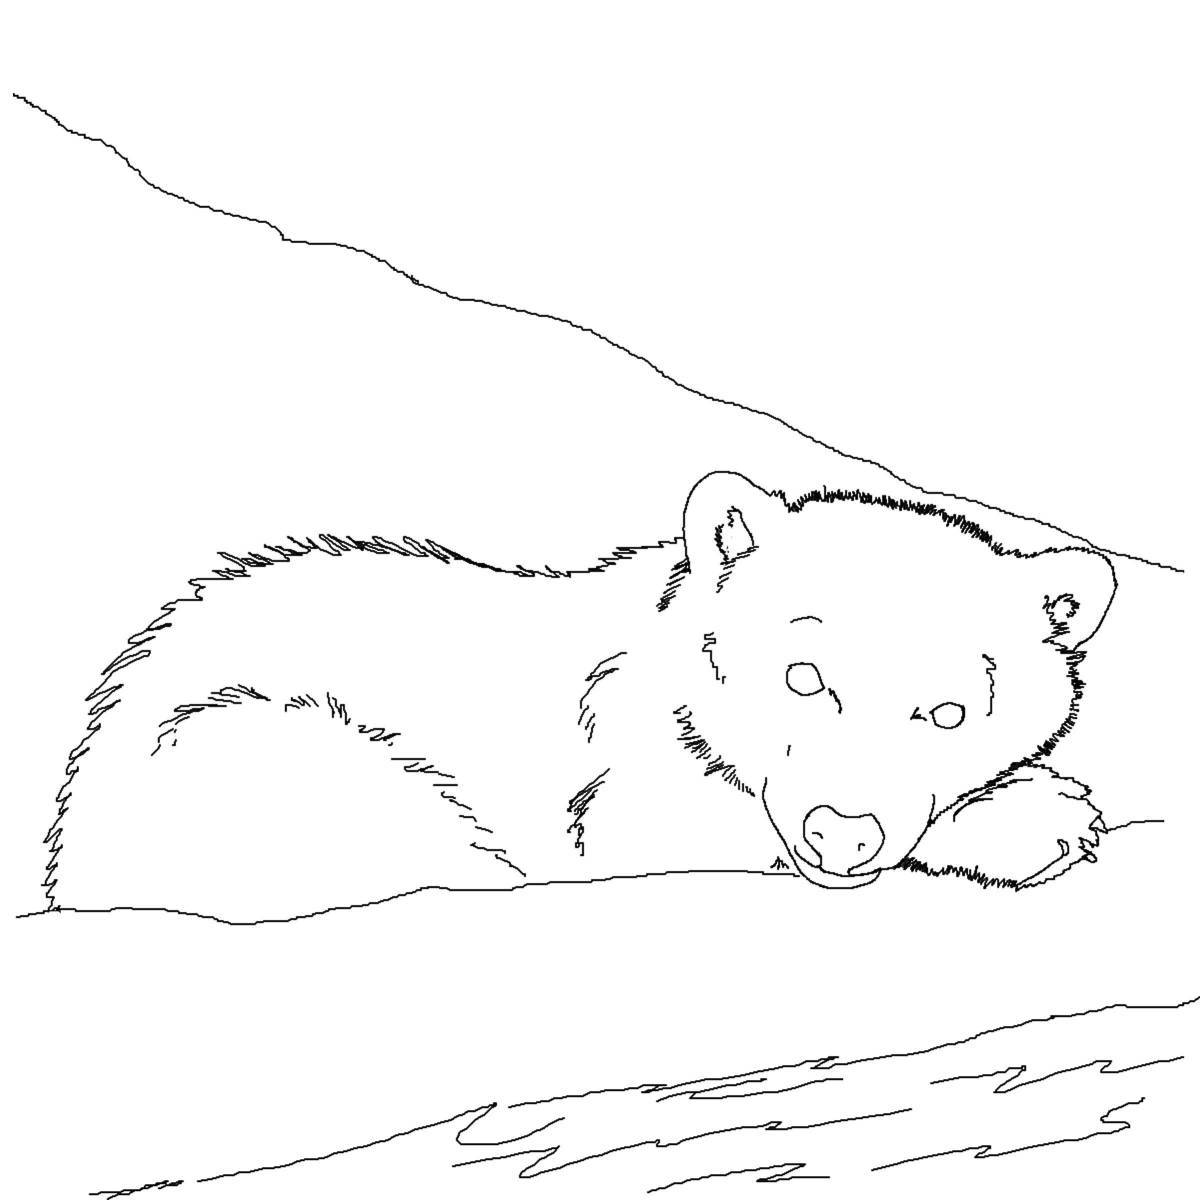 Coloring page of a cheerful bear in a lair